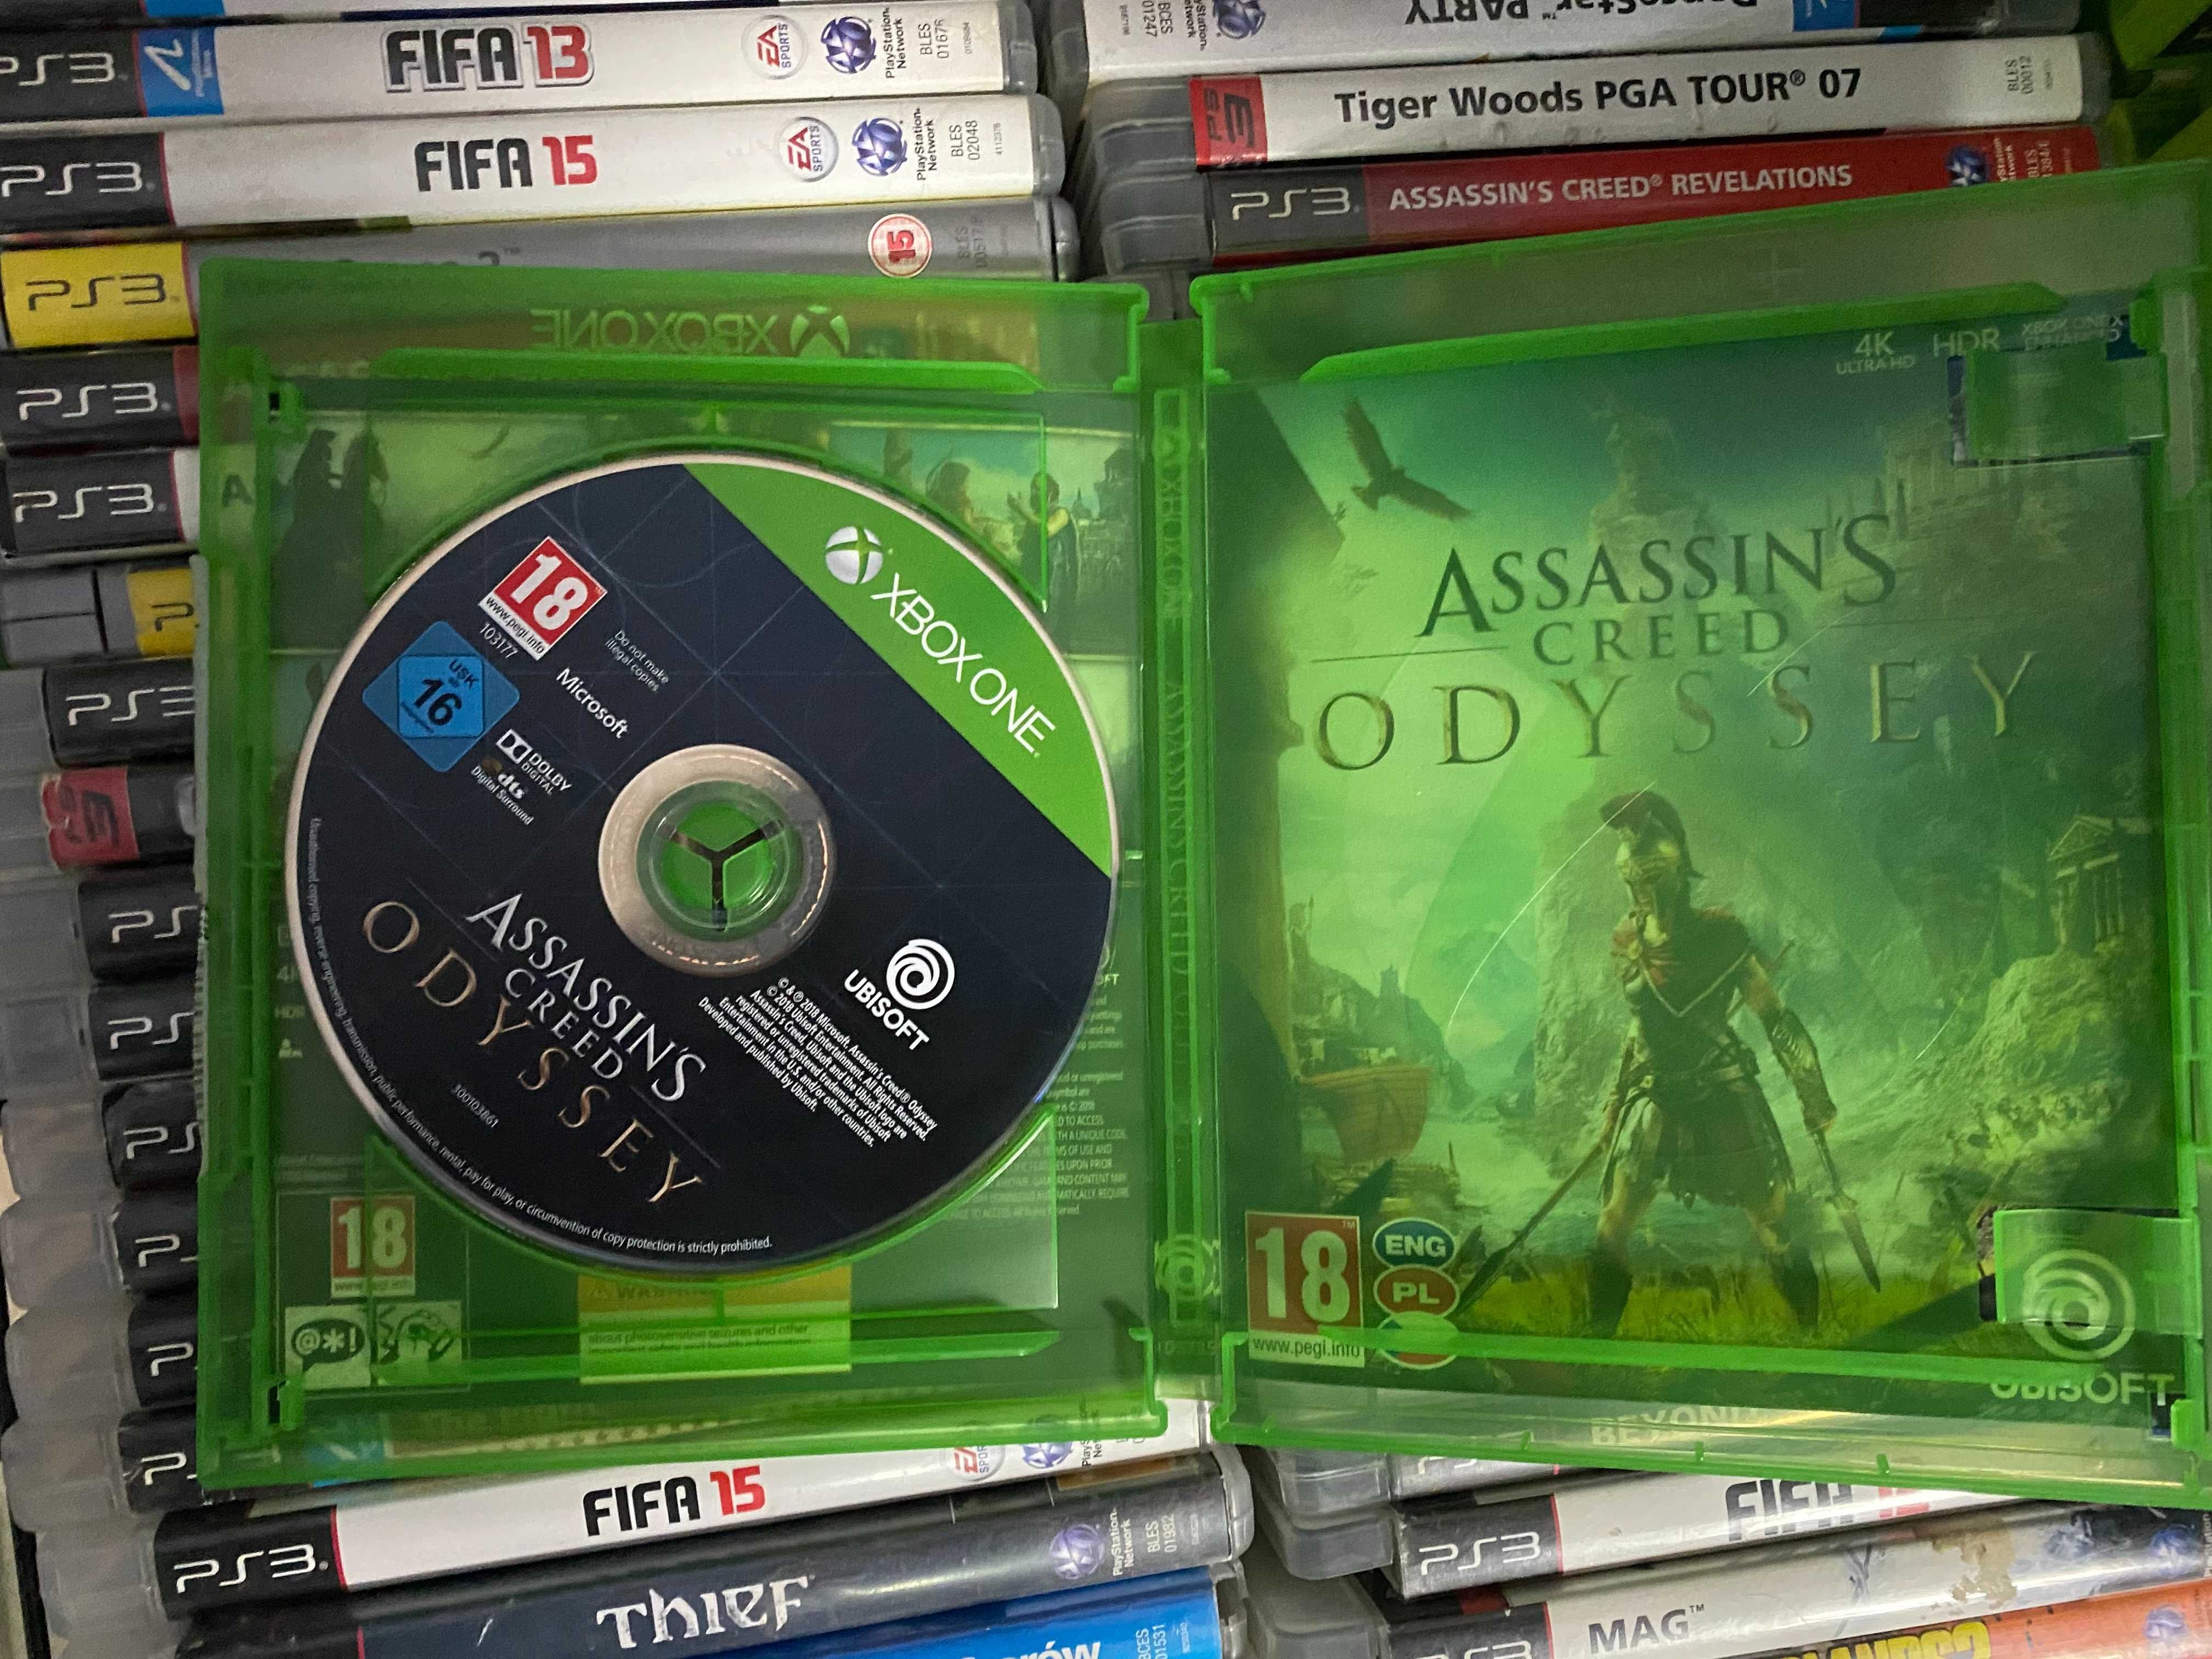 Assassins Creed Odyssey PL|Xbox One/Series X